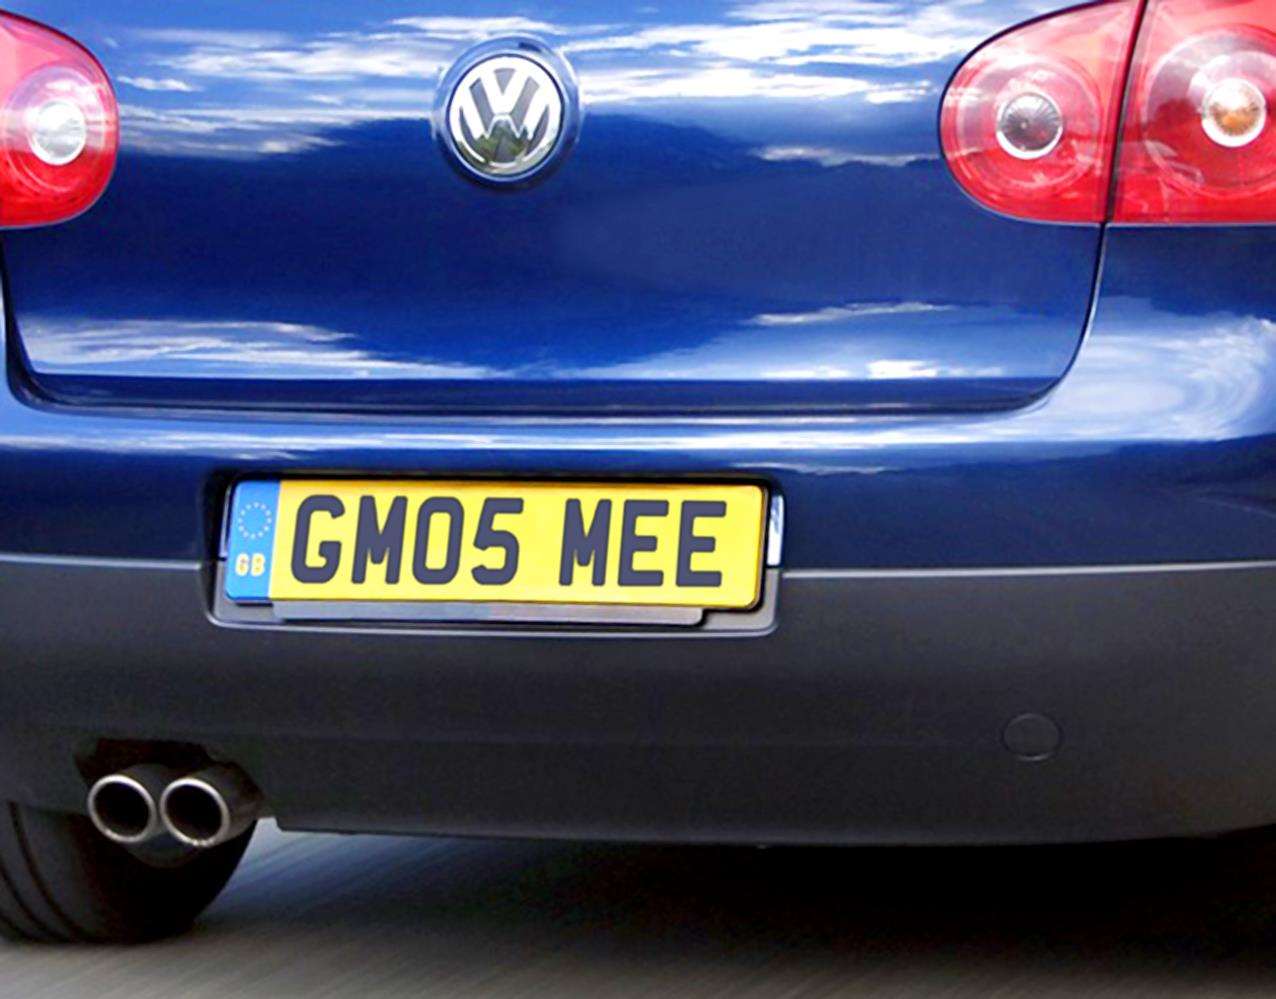 George Mee was caught after driving to a house in car with a personalised number plate